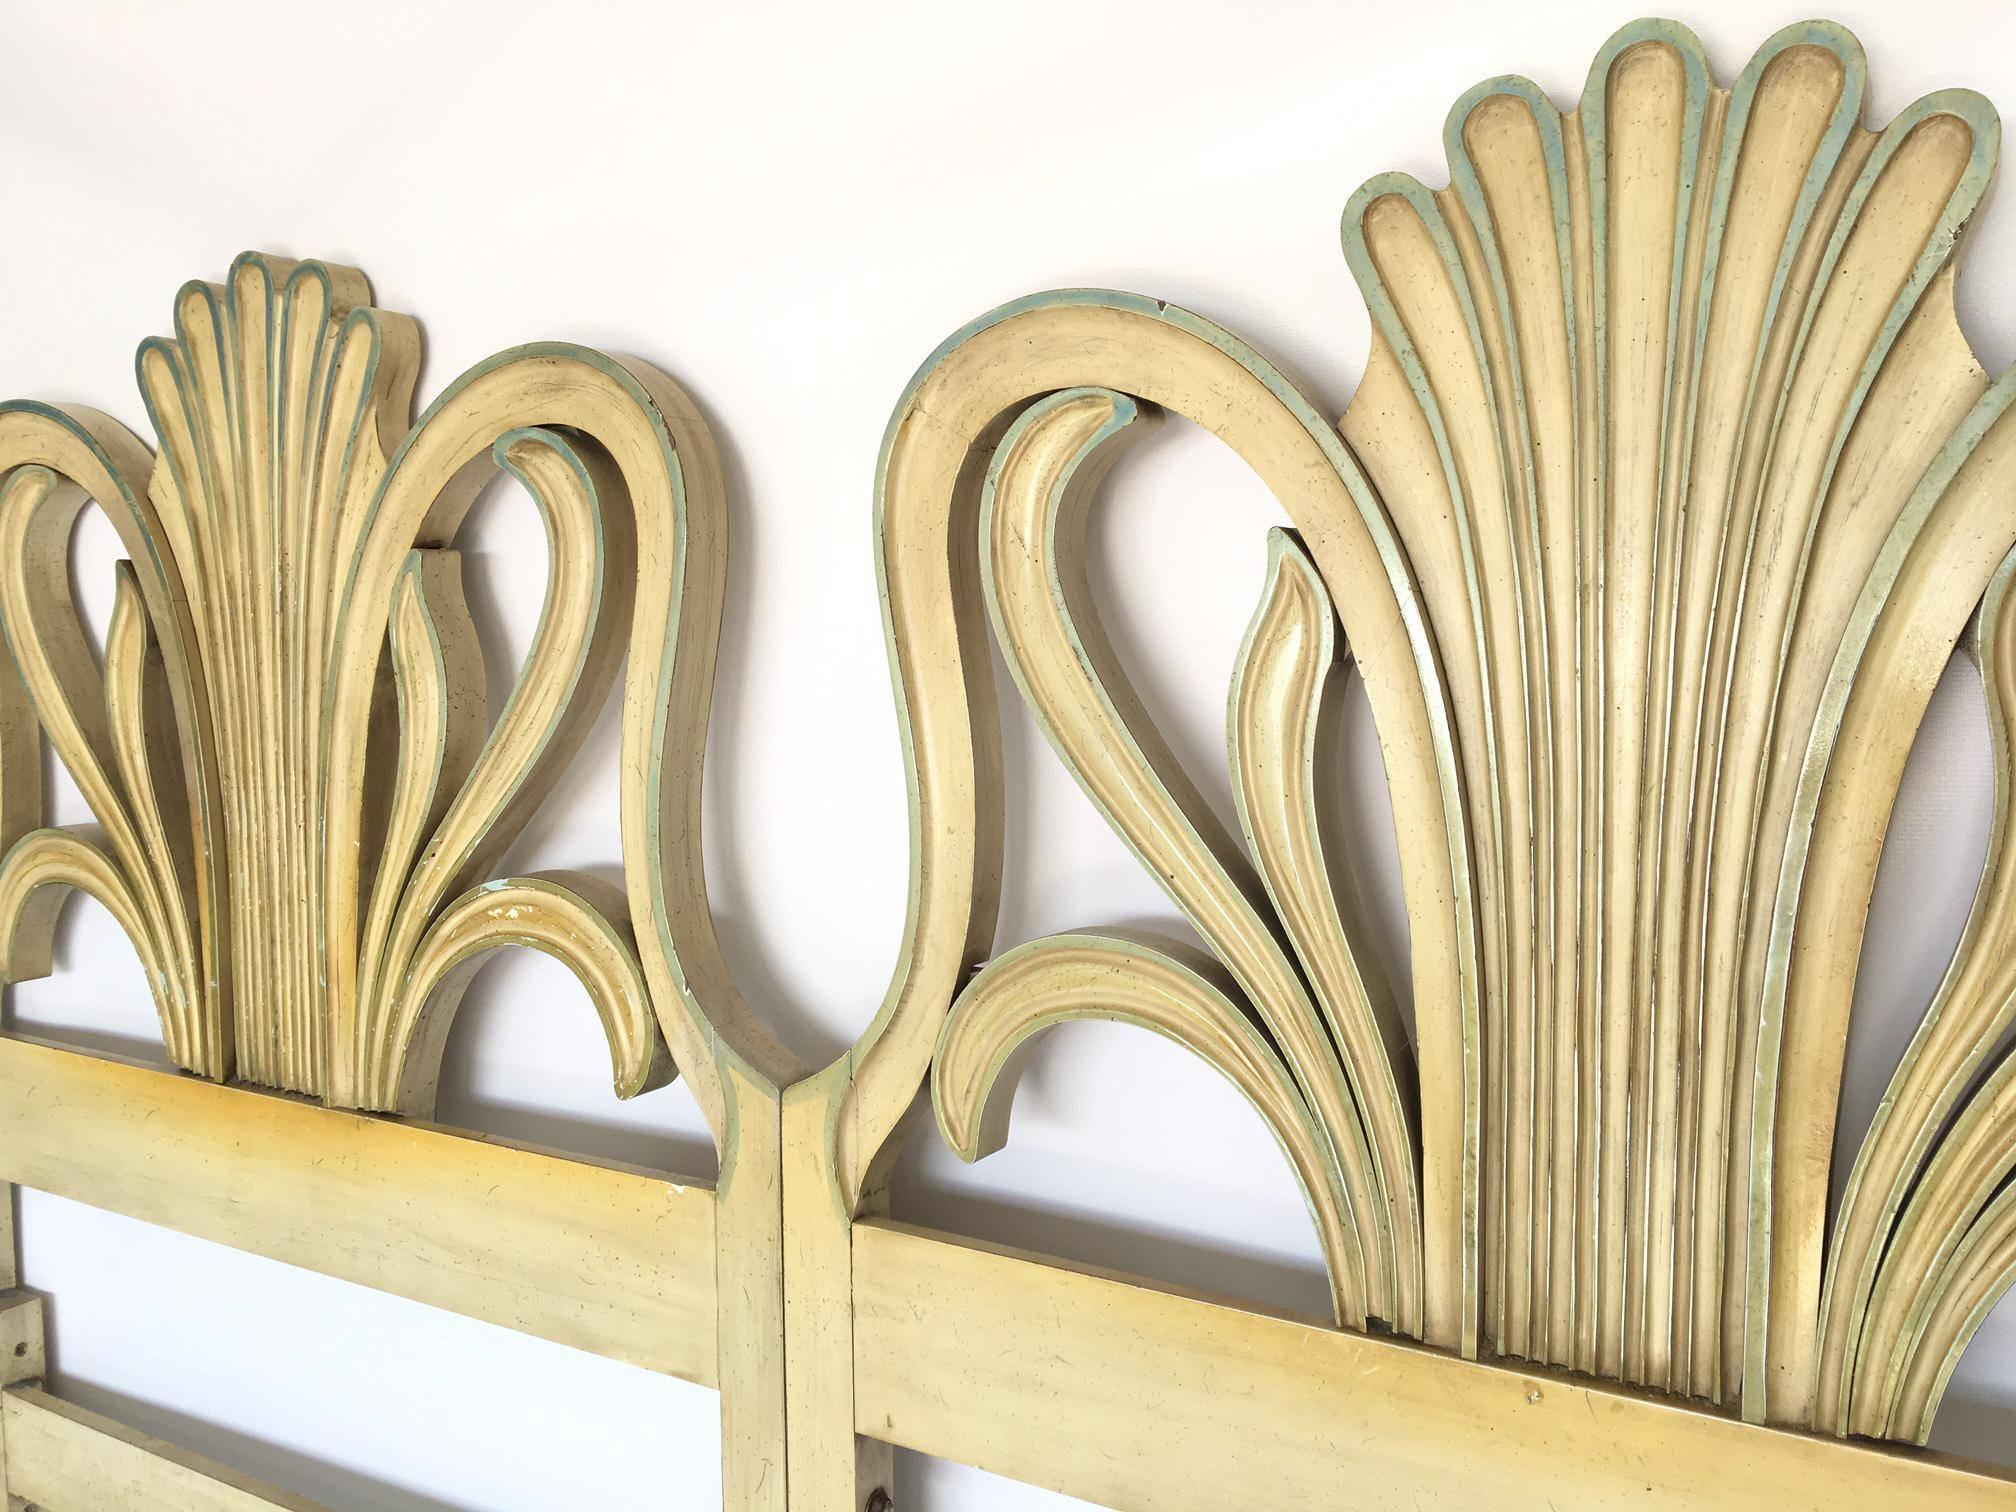 Highly carved Art Nouveau style king-size headboard in the manner of Dorothy Draper. Headboard was factory made as two twin headboards mounted together. Could be taken apart and used as two separate twin size headboards, or used as a king as